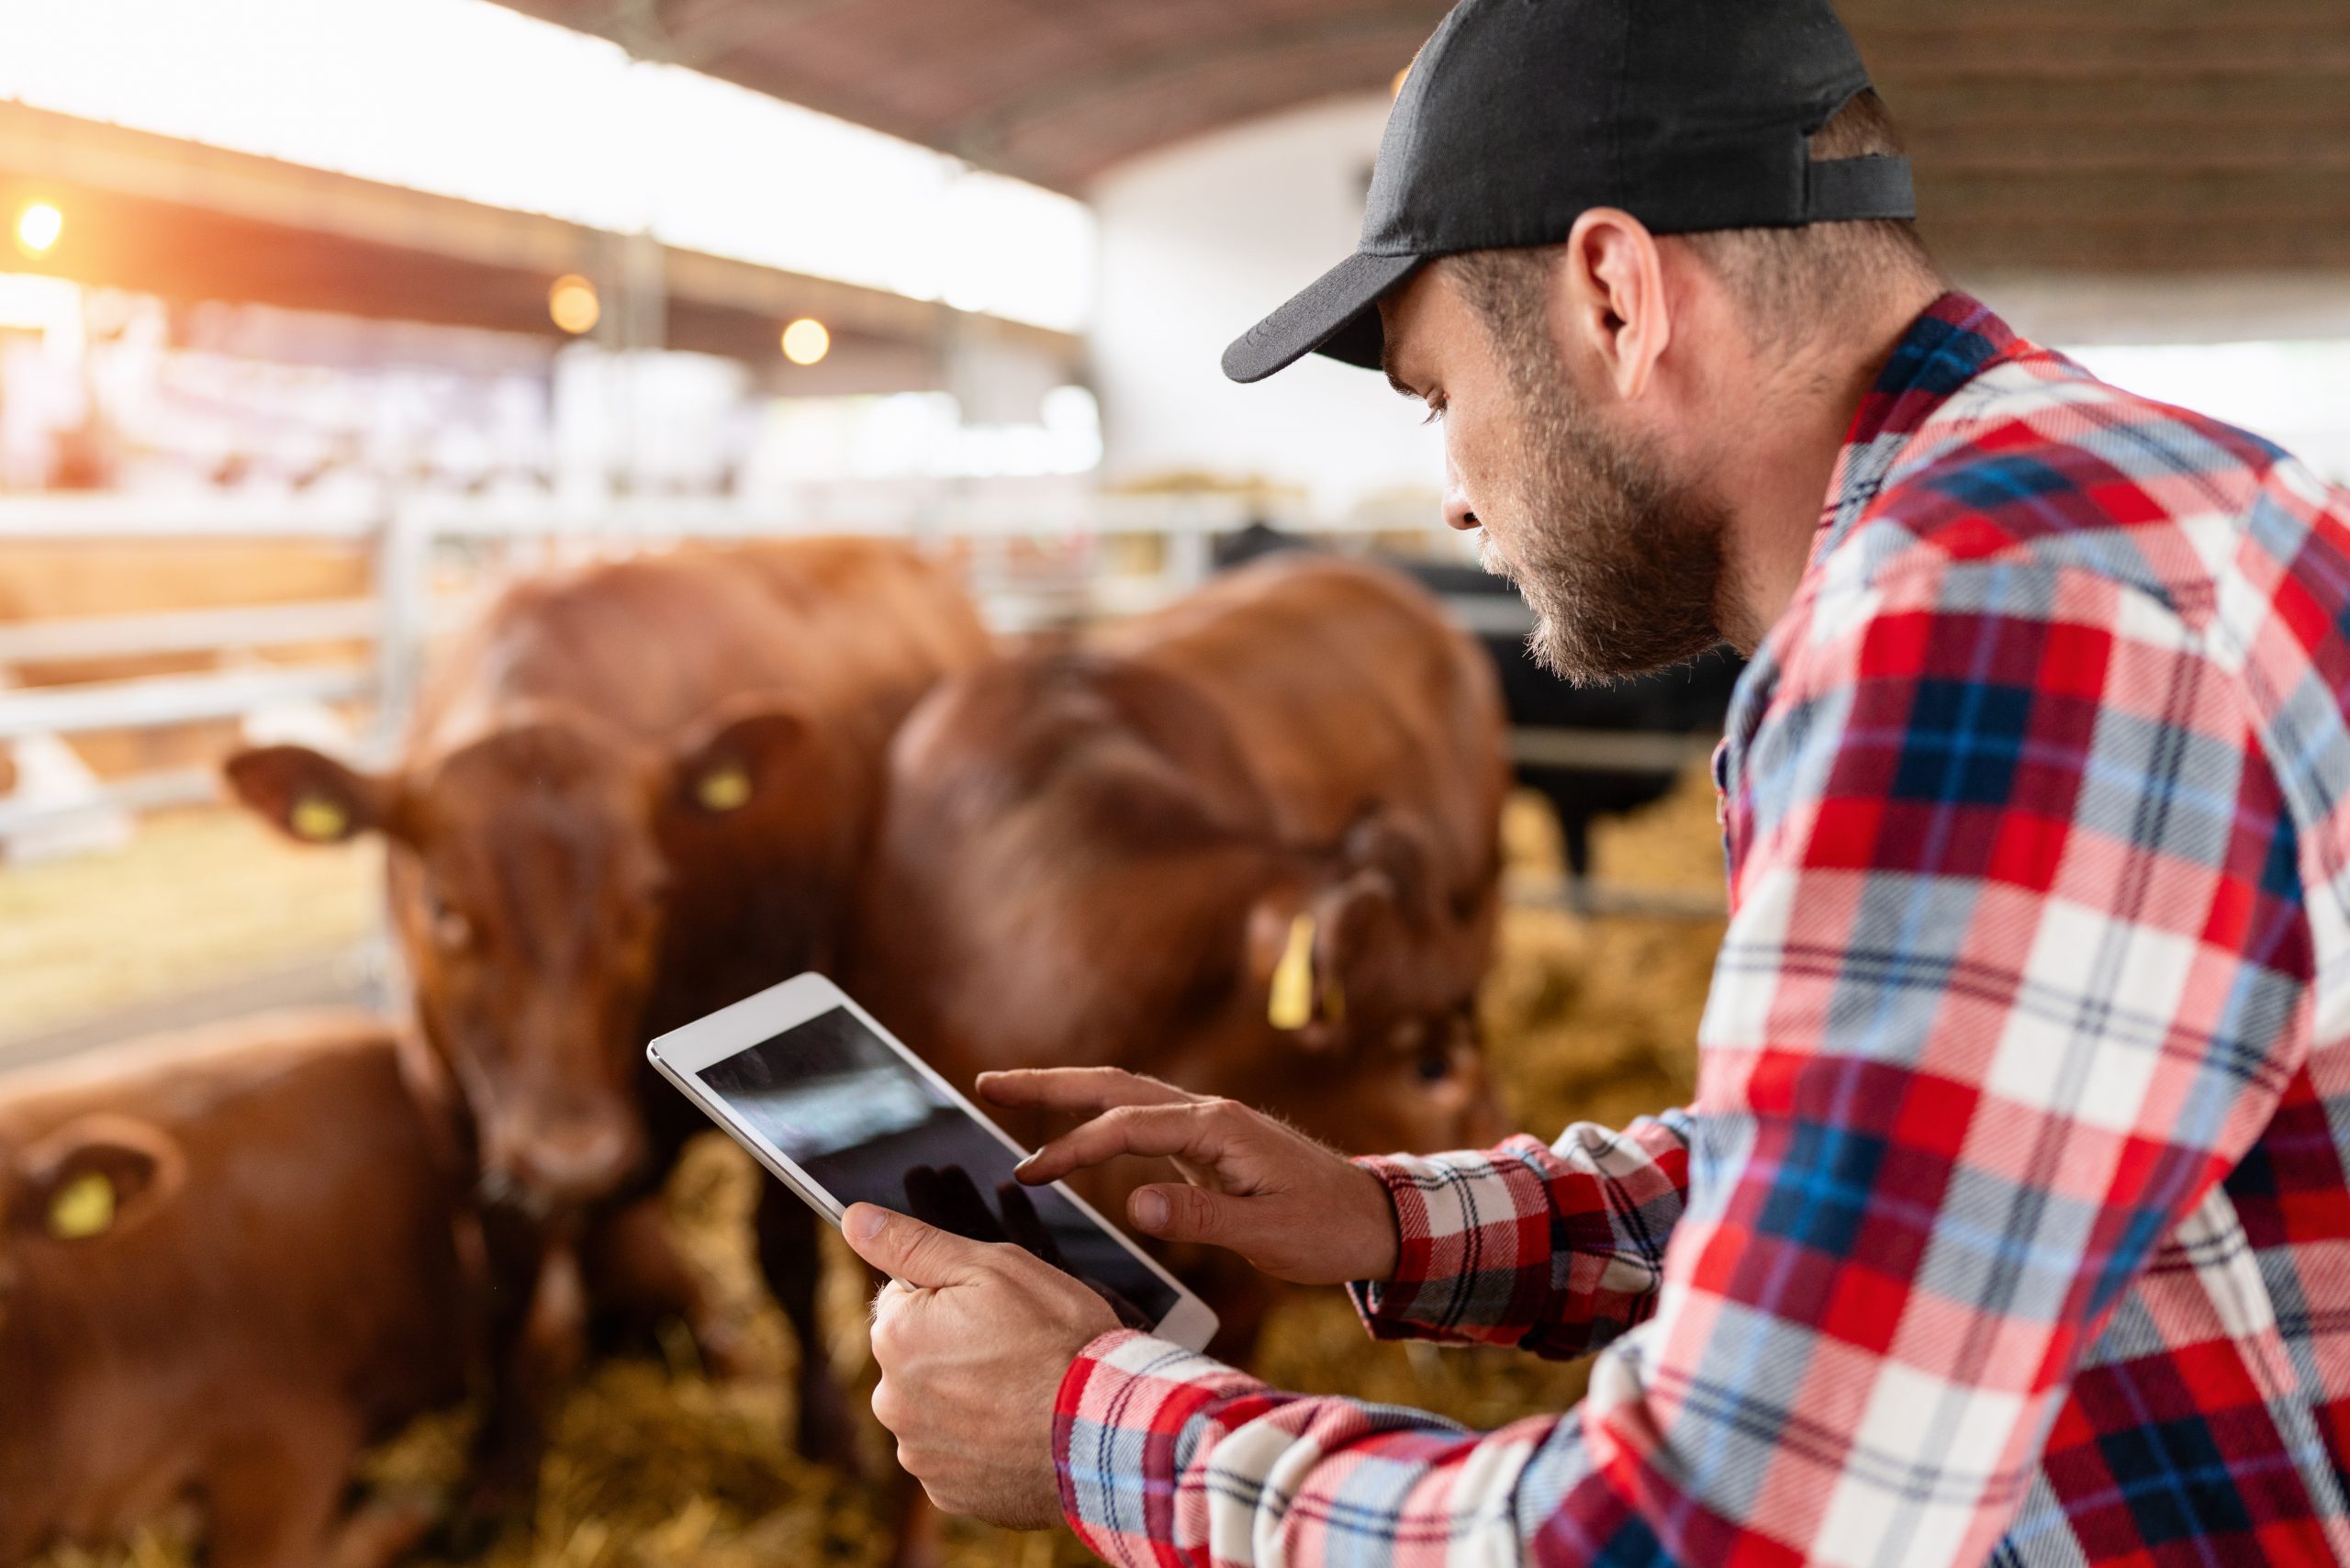 The Growing Need to Digitize Livestock Record Keeping Process